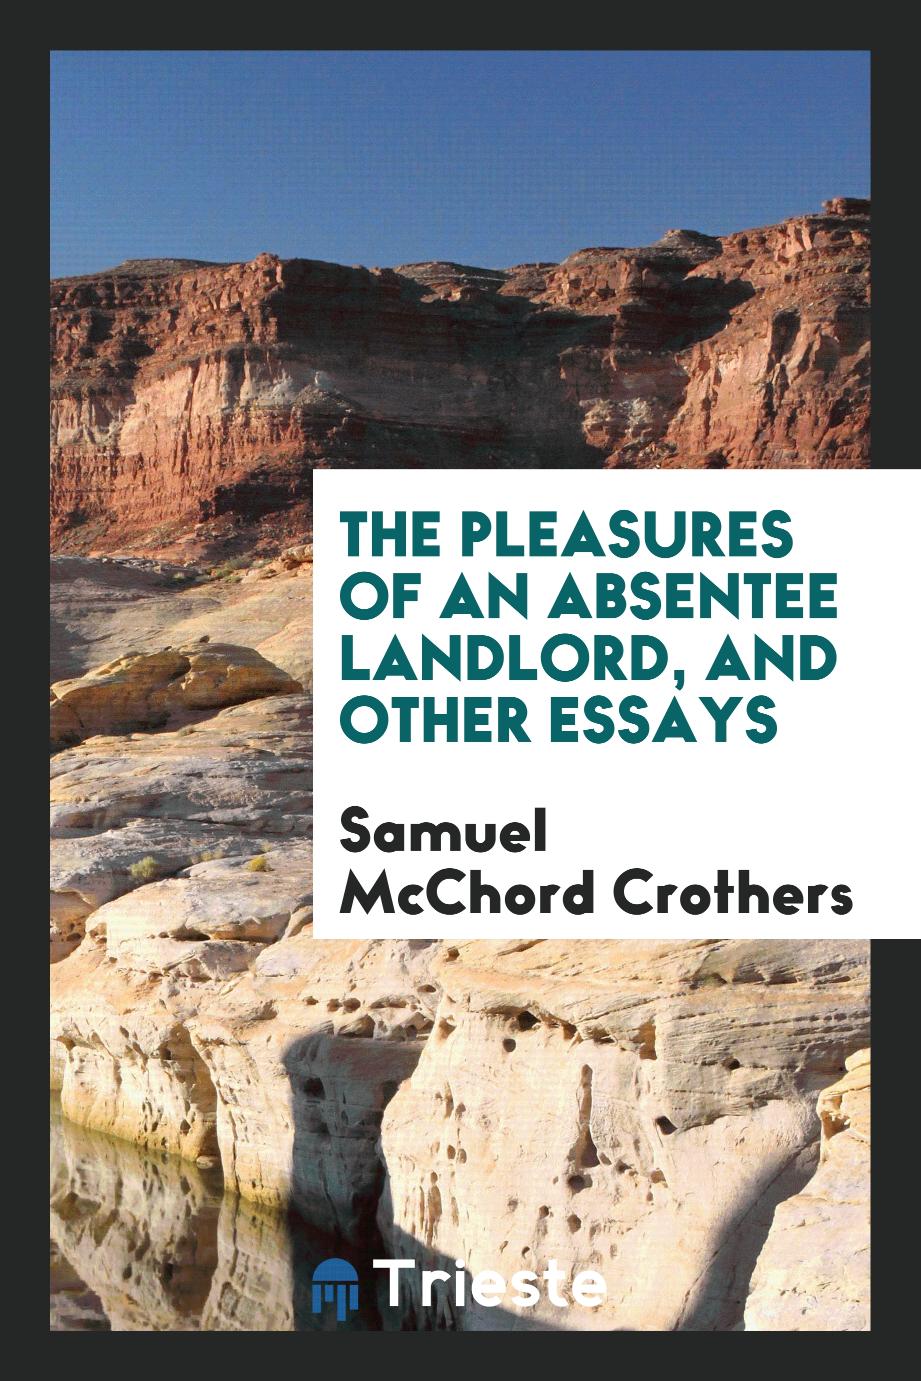 The pleasures of an absentee landlord, and other essays